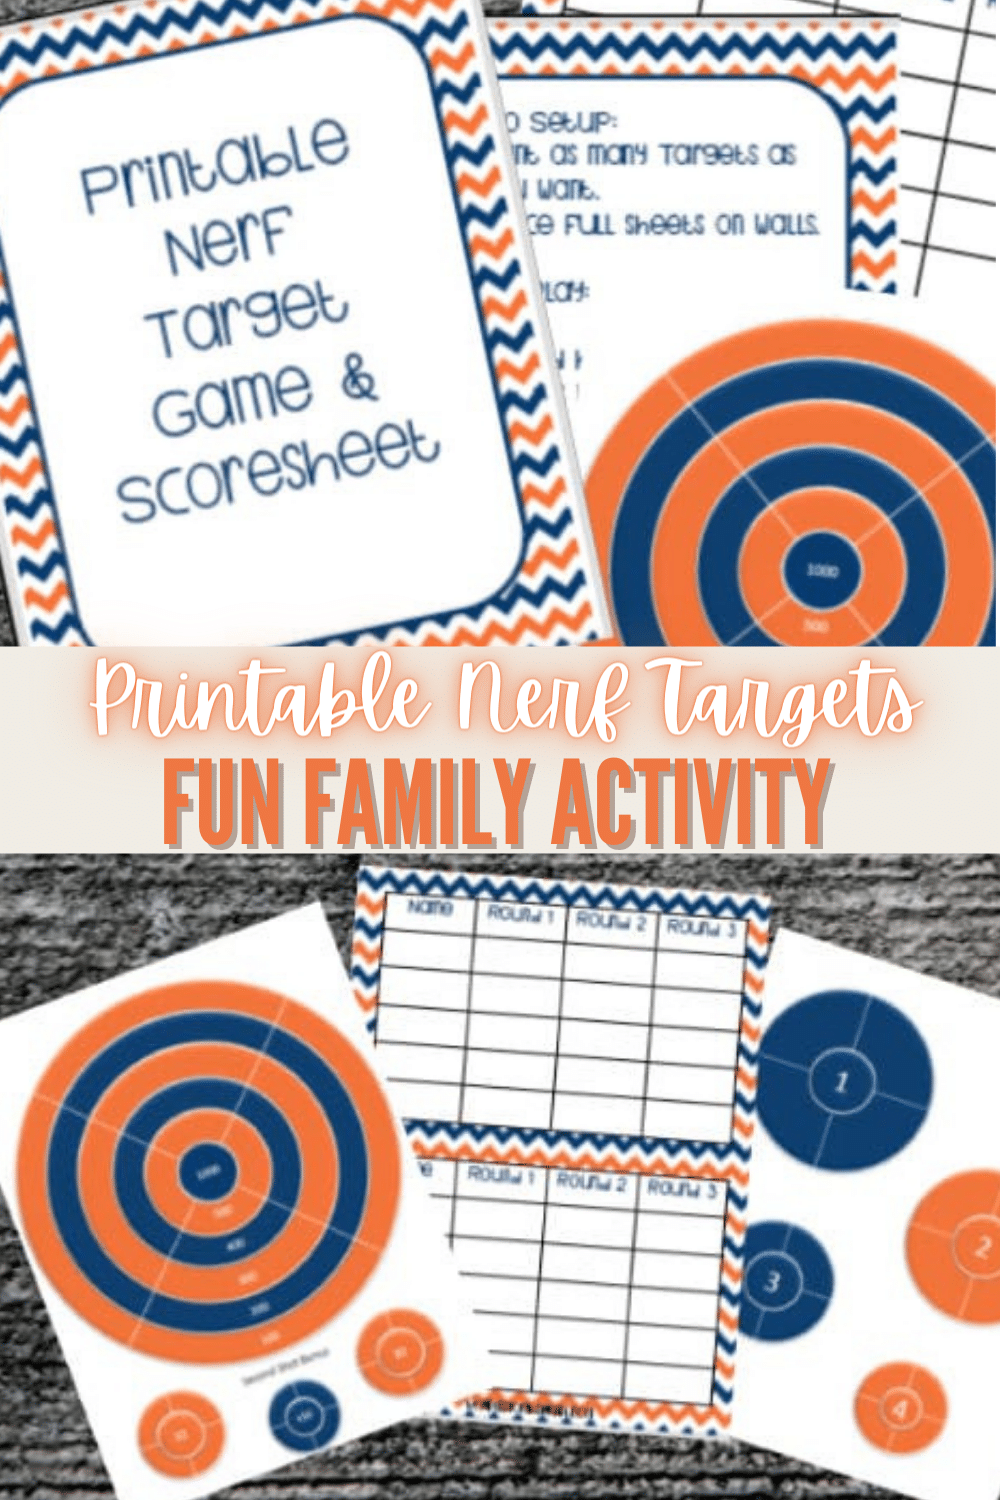 Printable Nerf Targets can make nerf games even more fun. There are several ways to play with these nerf targets and your whole family will have a blast. #printables #nerf #familyfun via @wondermomwannab